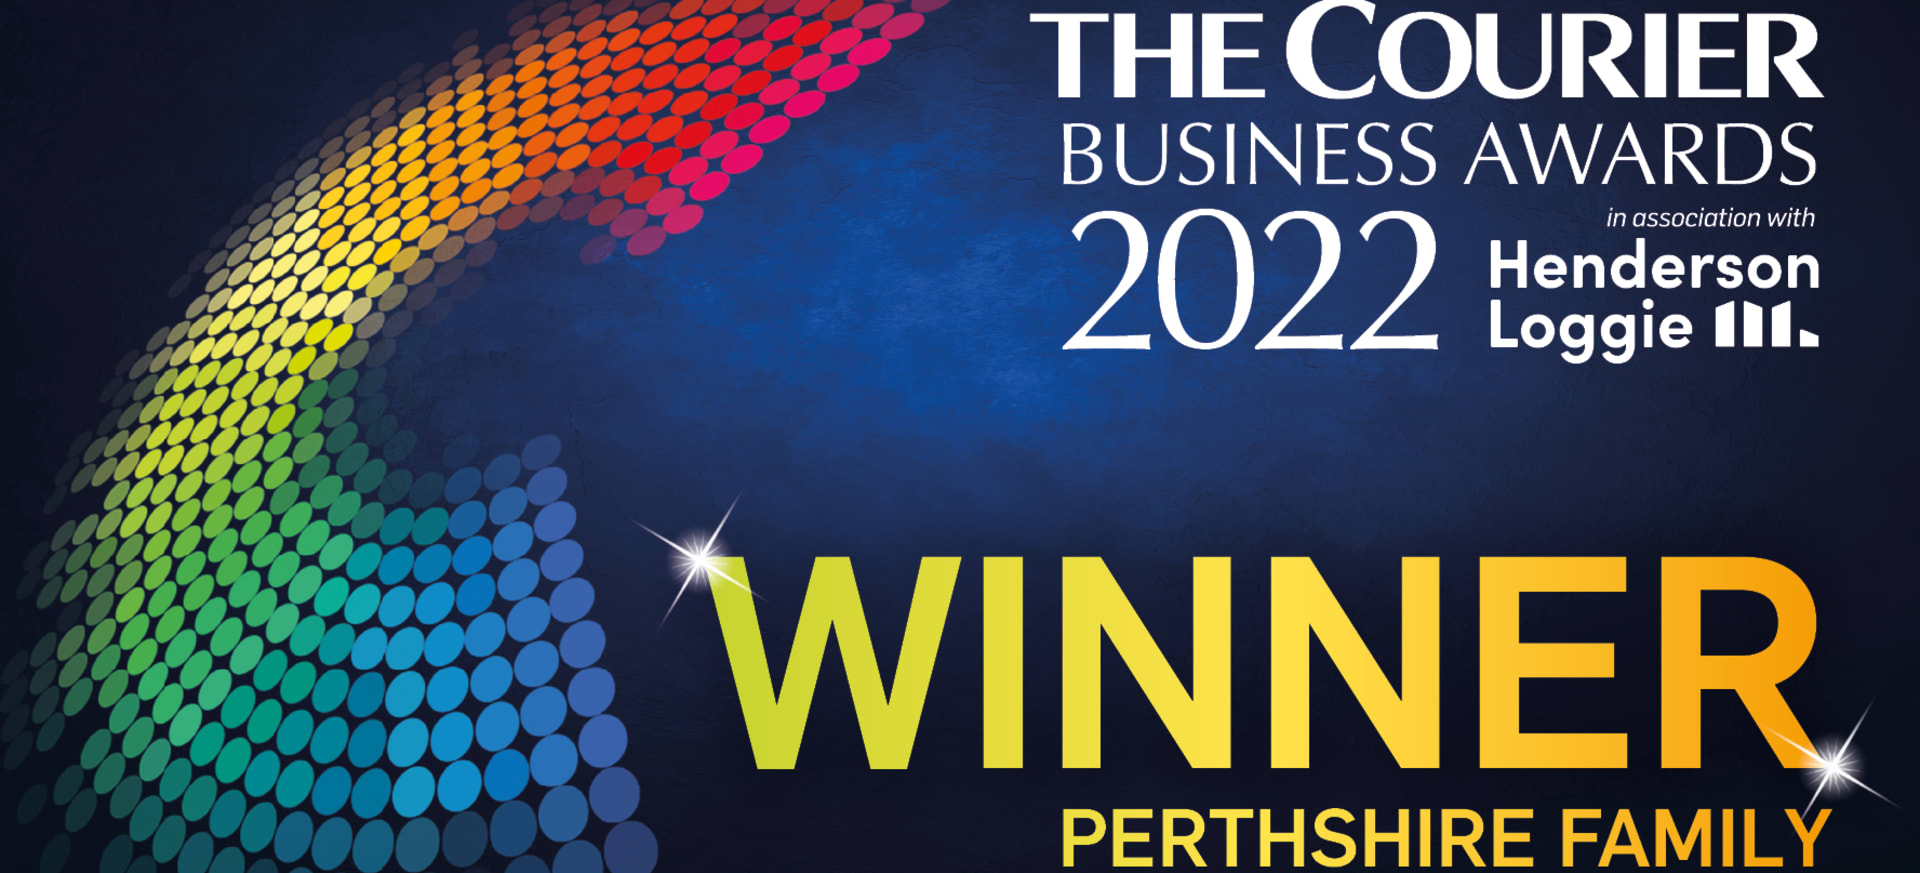 Courier Business Awards 2022